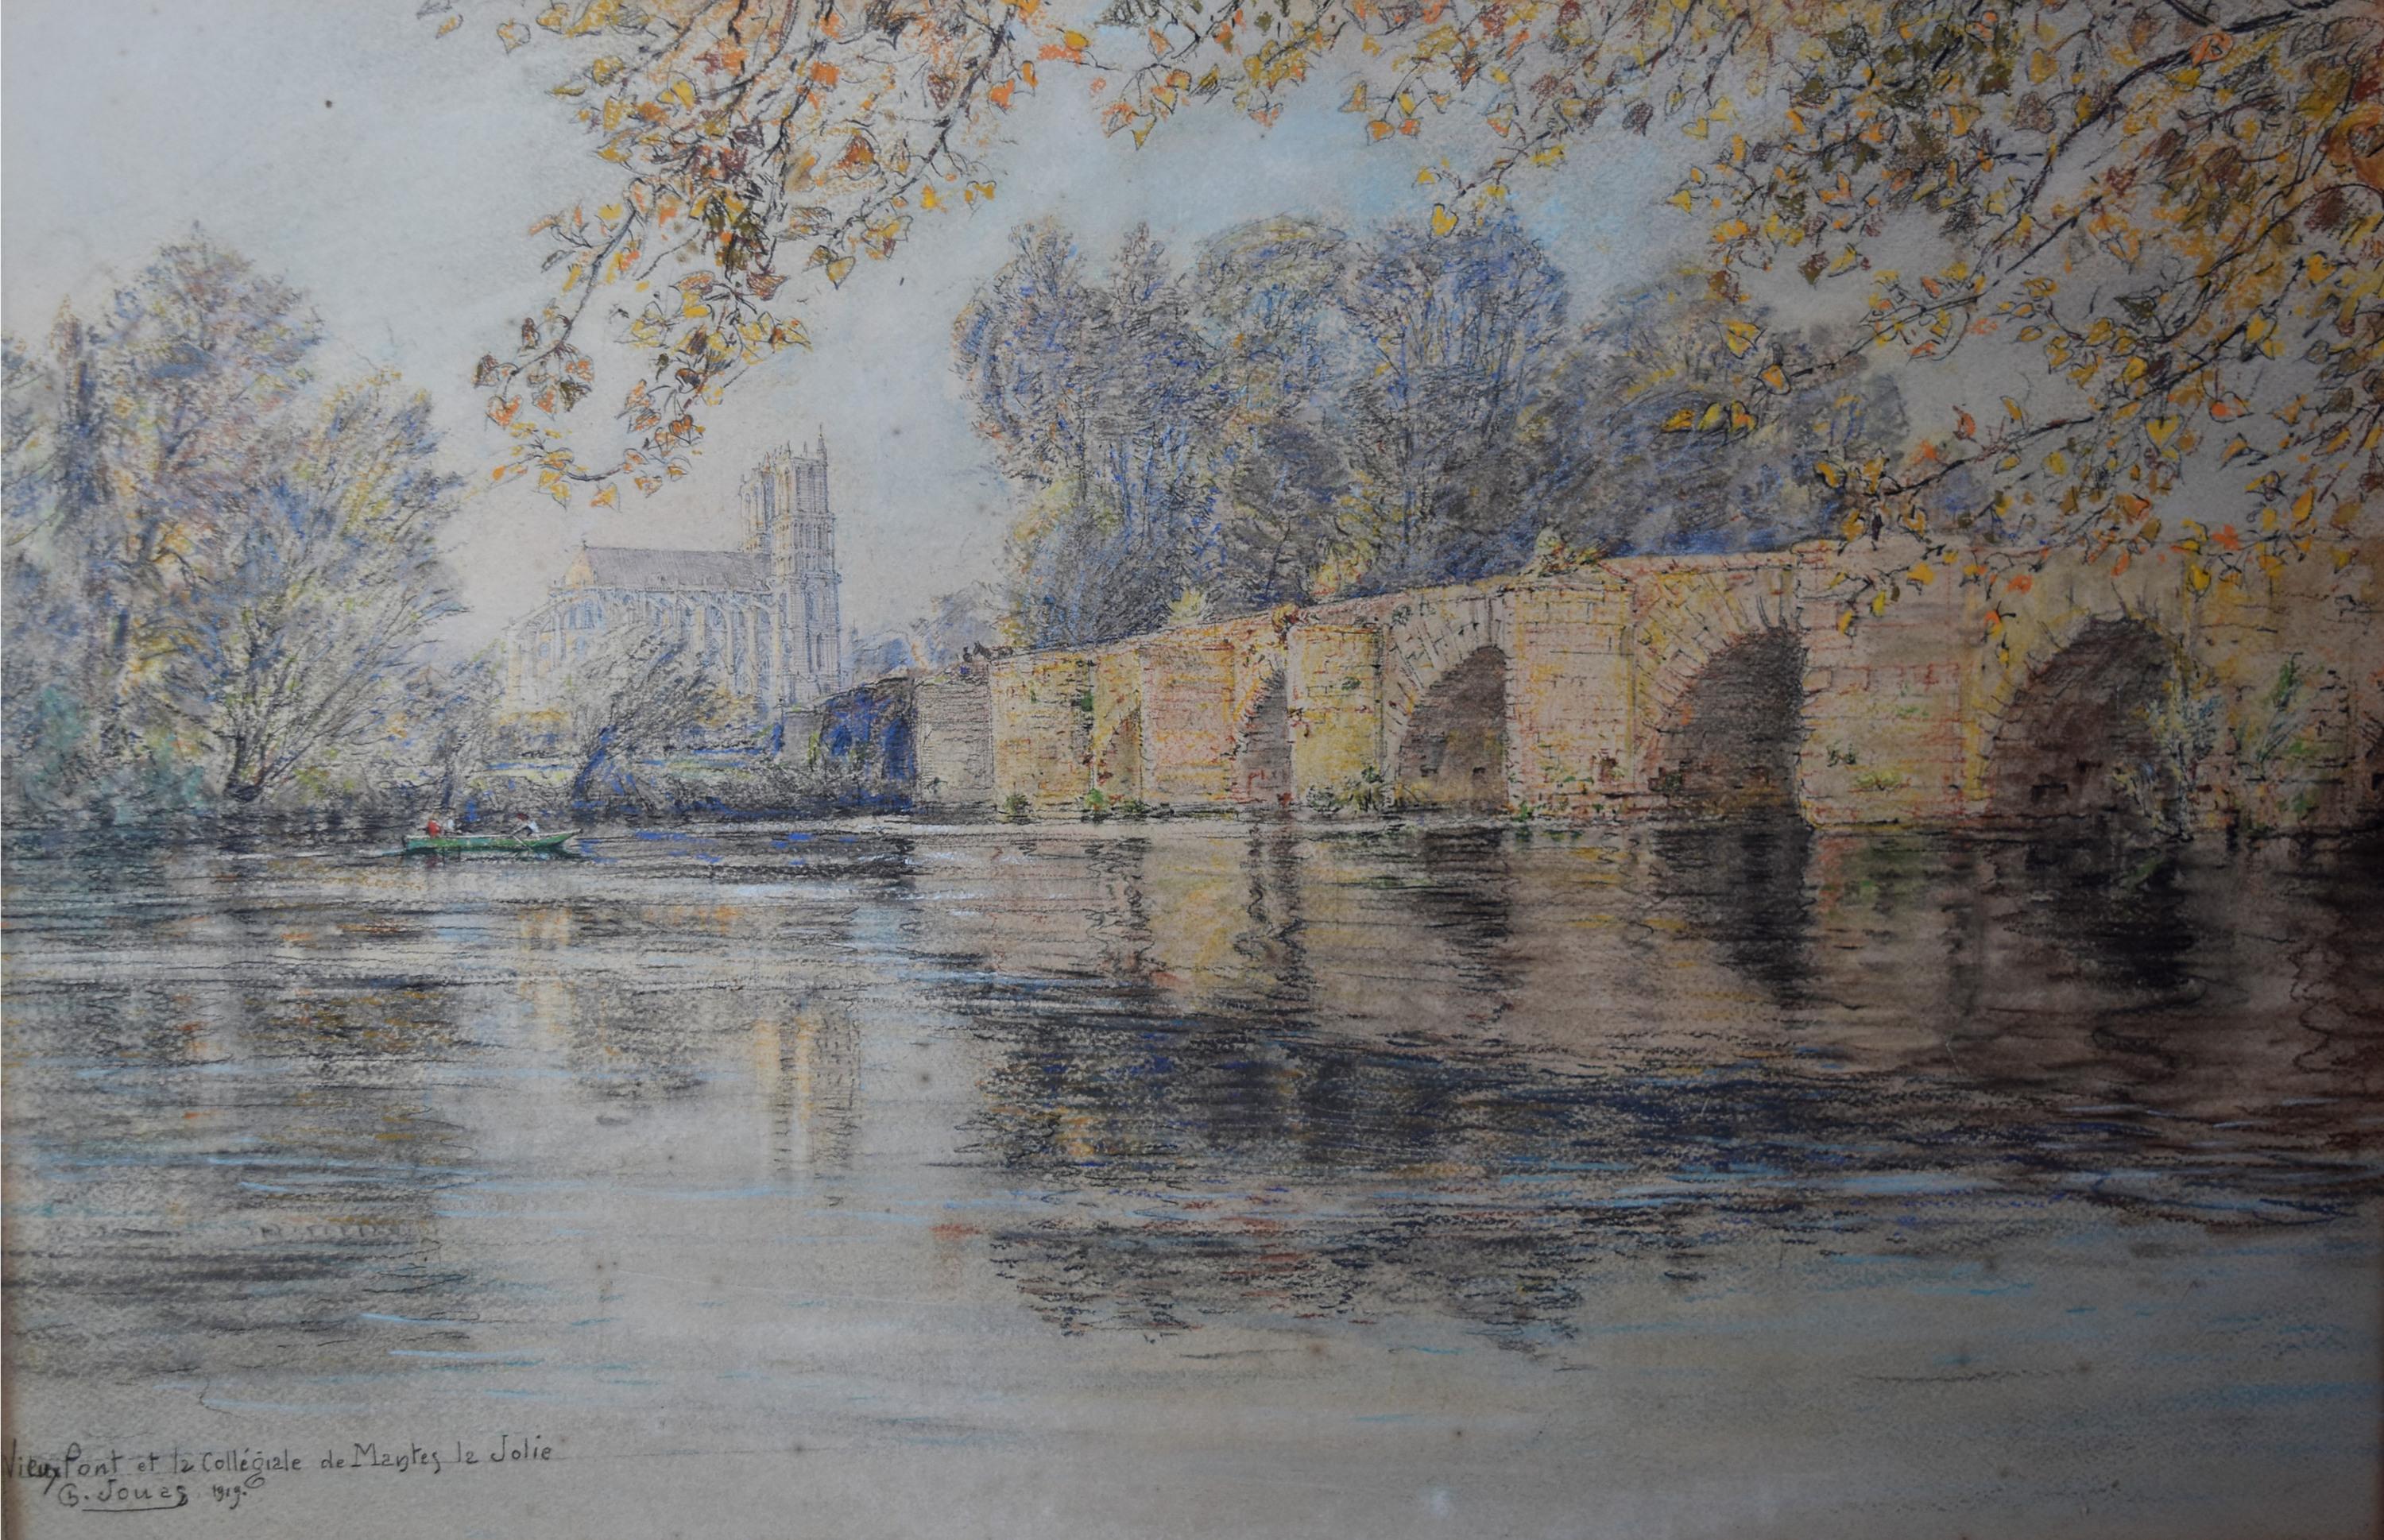 Charles Jouas (1866-1942) 
View of the old bridge and the Collegiate Church of Mantes La Jolie 
Pastel and colored pencils on paper 
Signed, dated and titled on the lower left 
31 x 46.5 cm 
Modern framing : 43 x 60 cm

Charles Jouas (1866-1942) was